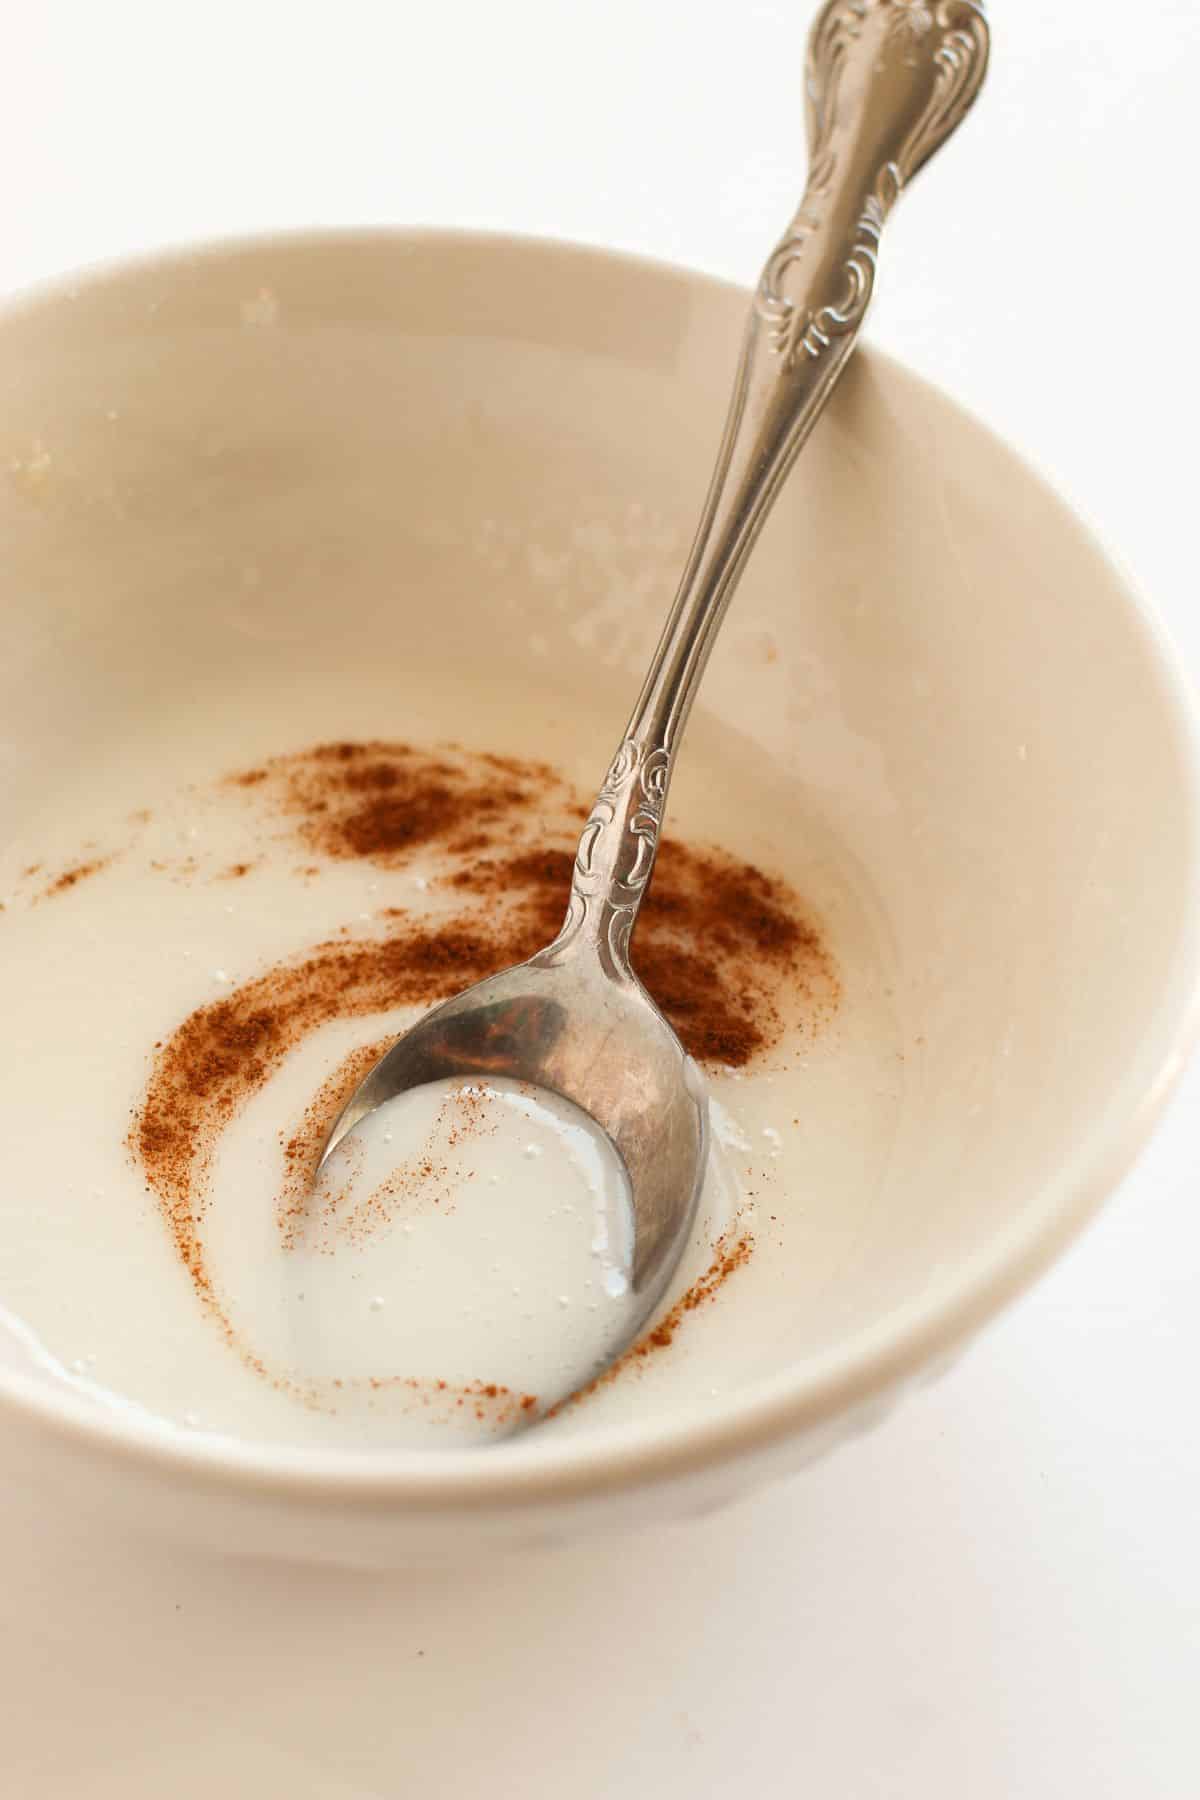 icing with cinnamon in bowl with spoon